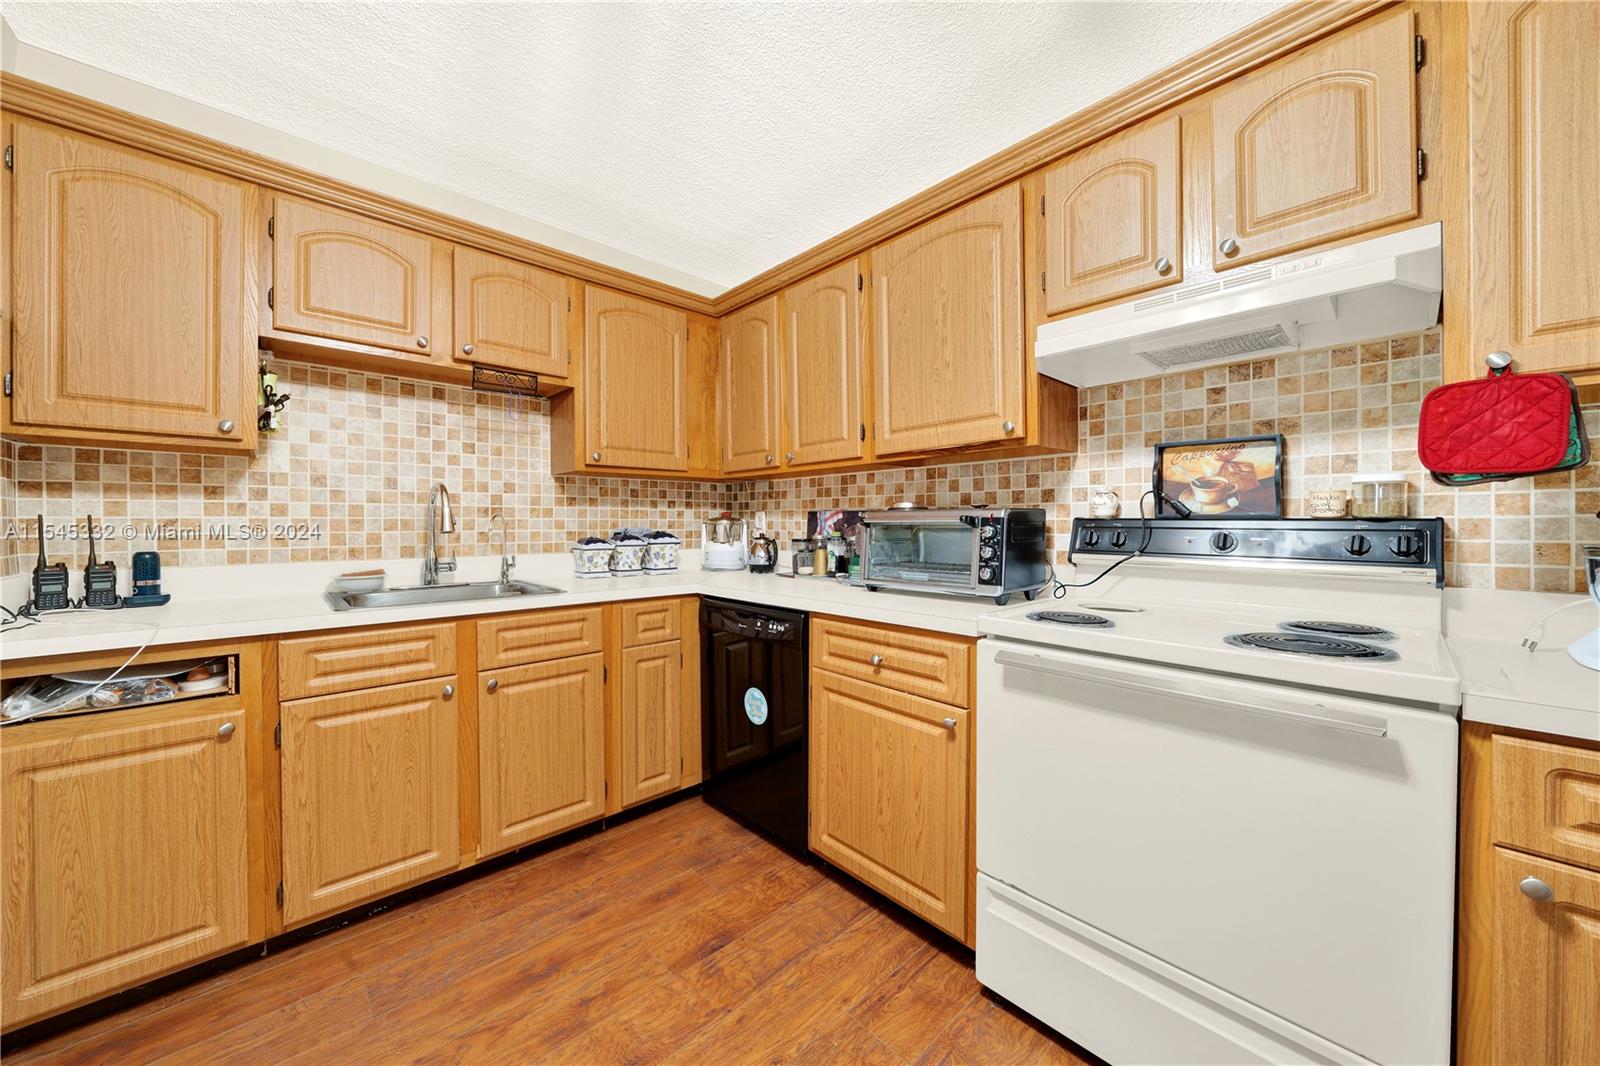 a kitchen with stainless steel appliances granite countertop a sink dishwasher stove and white cabinets with wooden floor